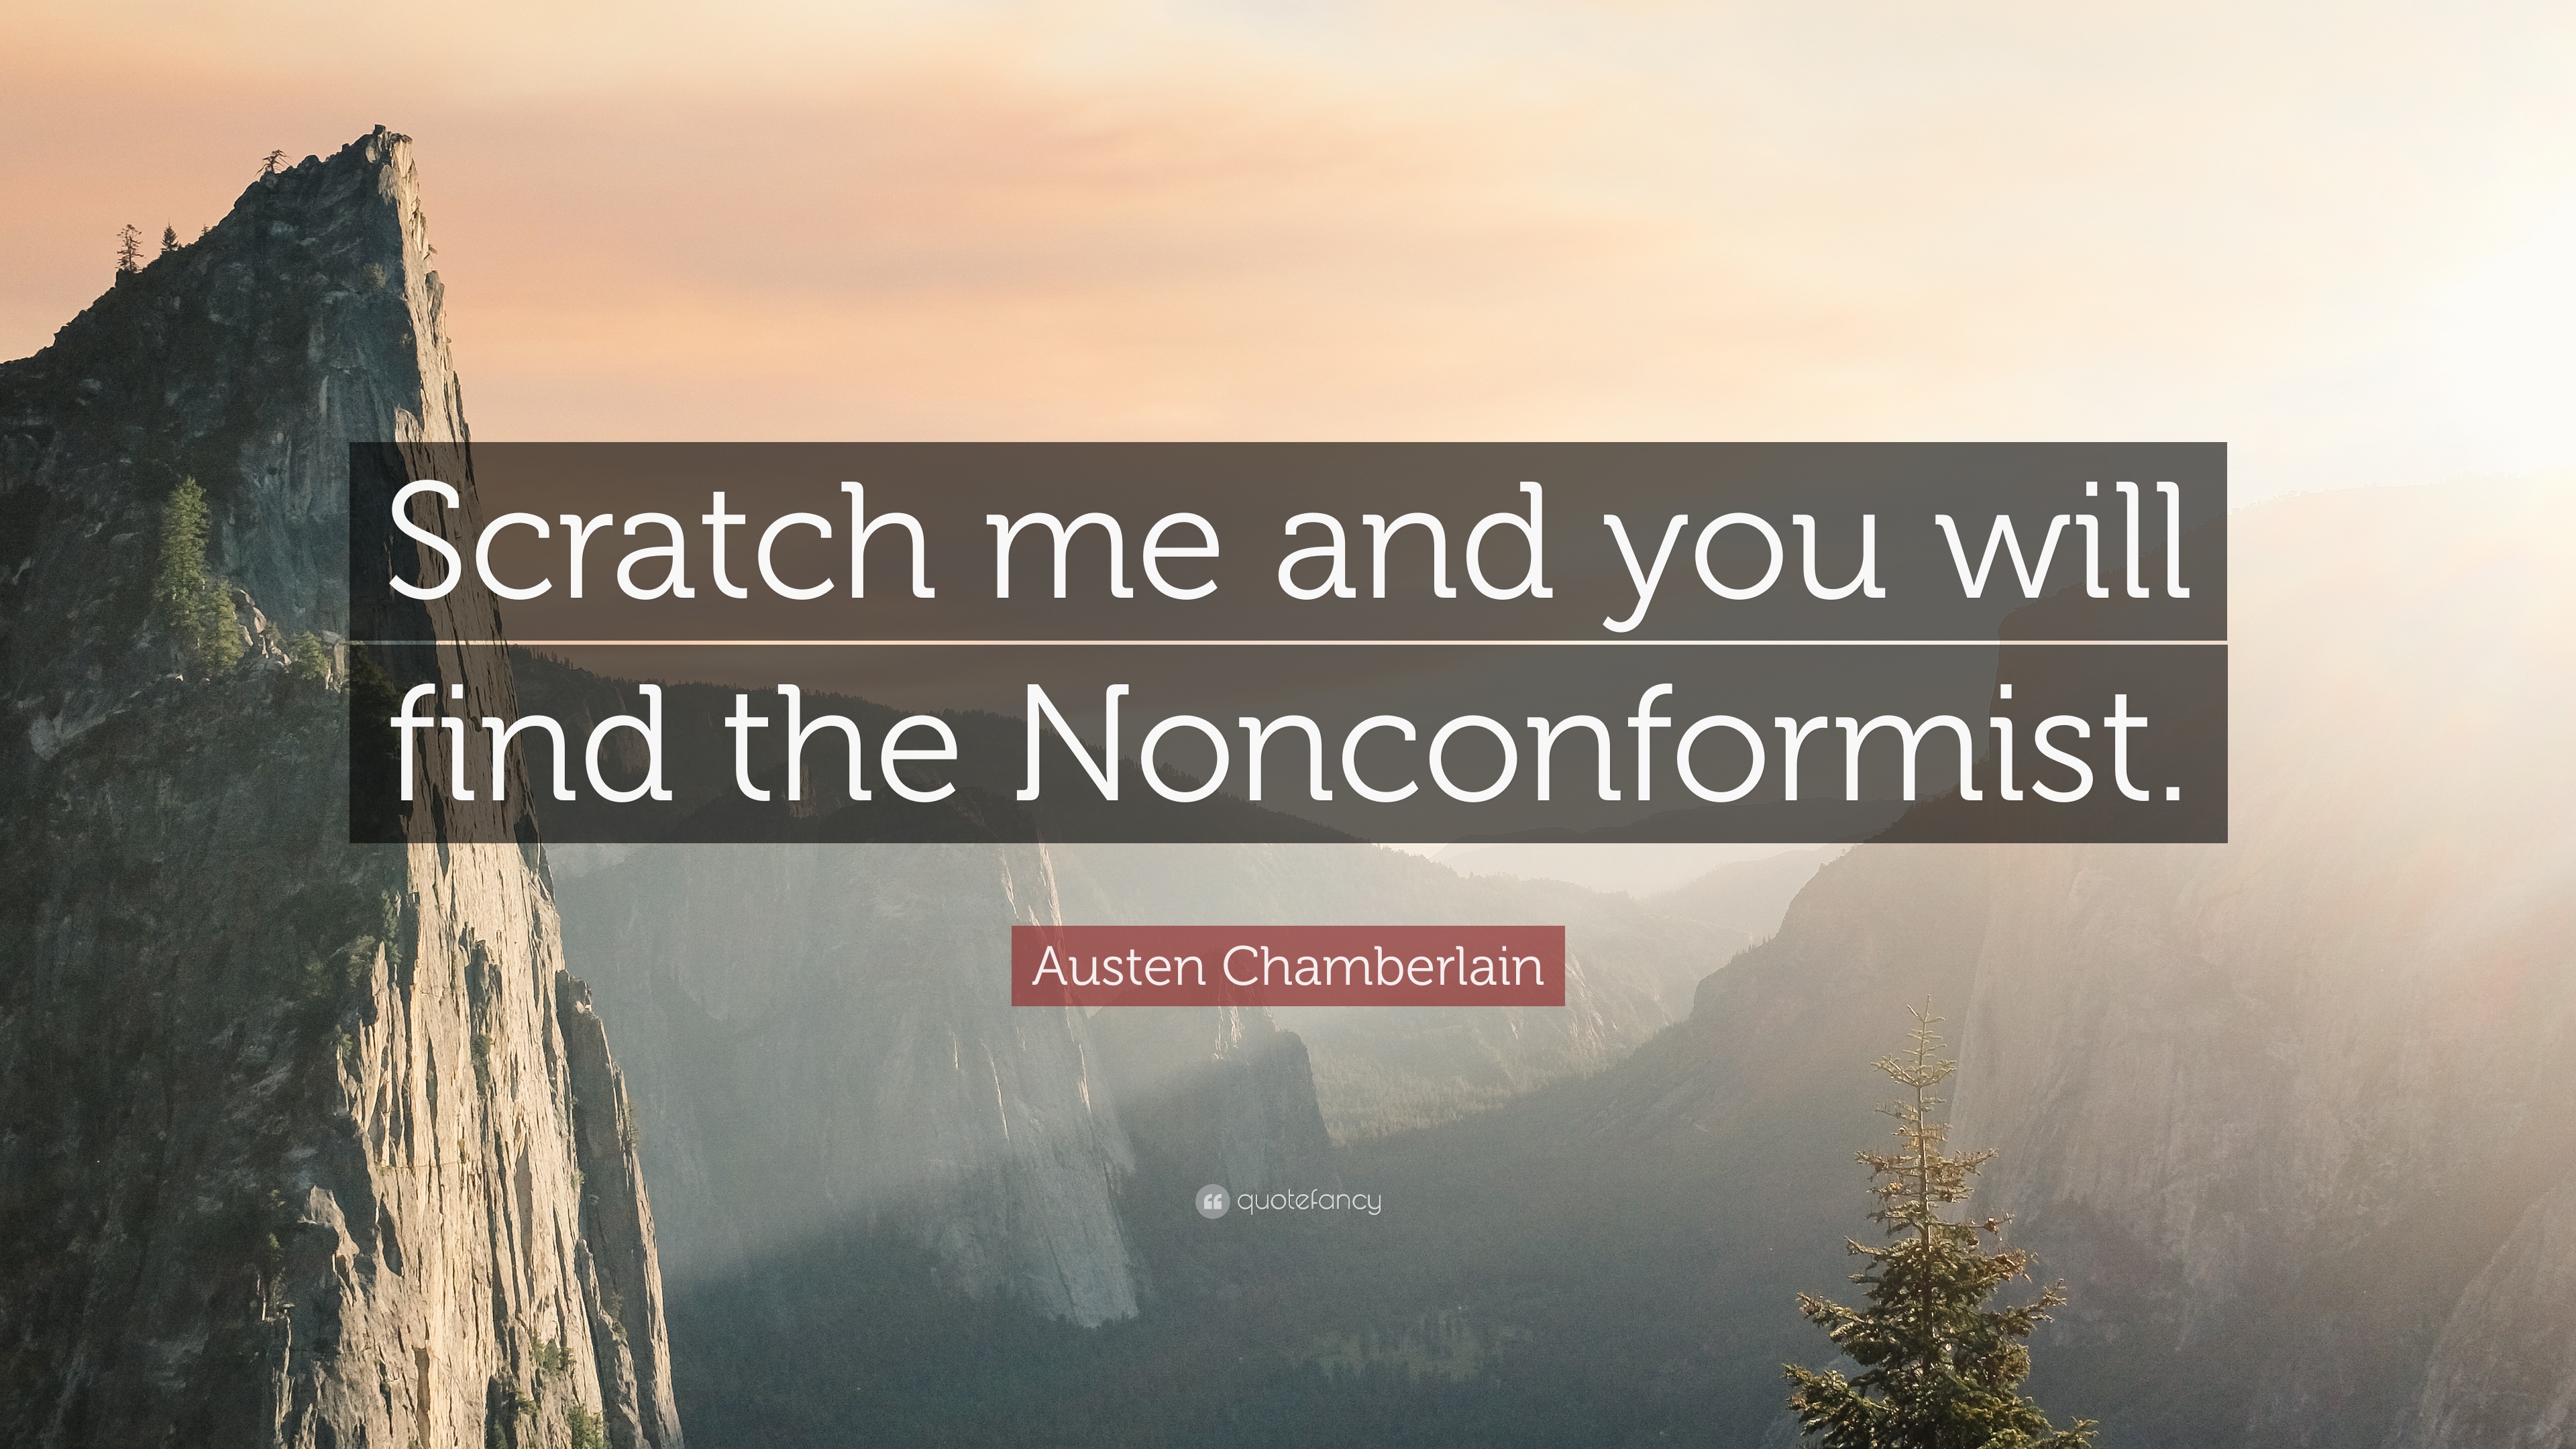 Austen Chamberlain Quote: “Scratch me and you will find the ...